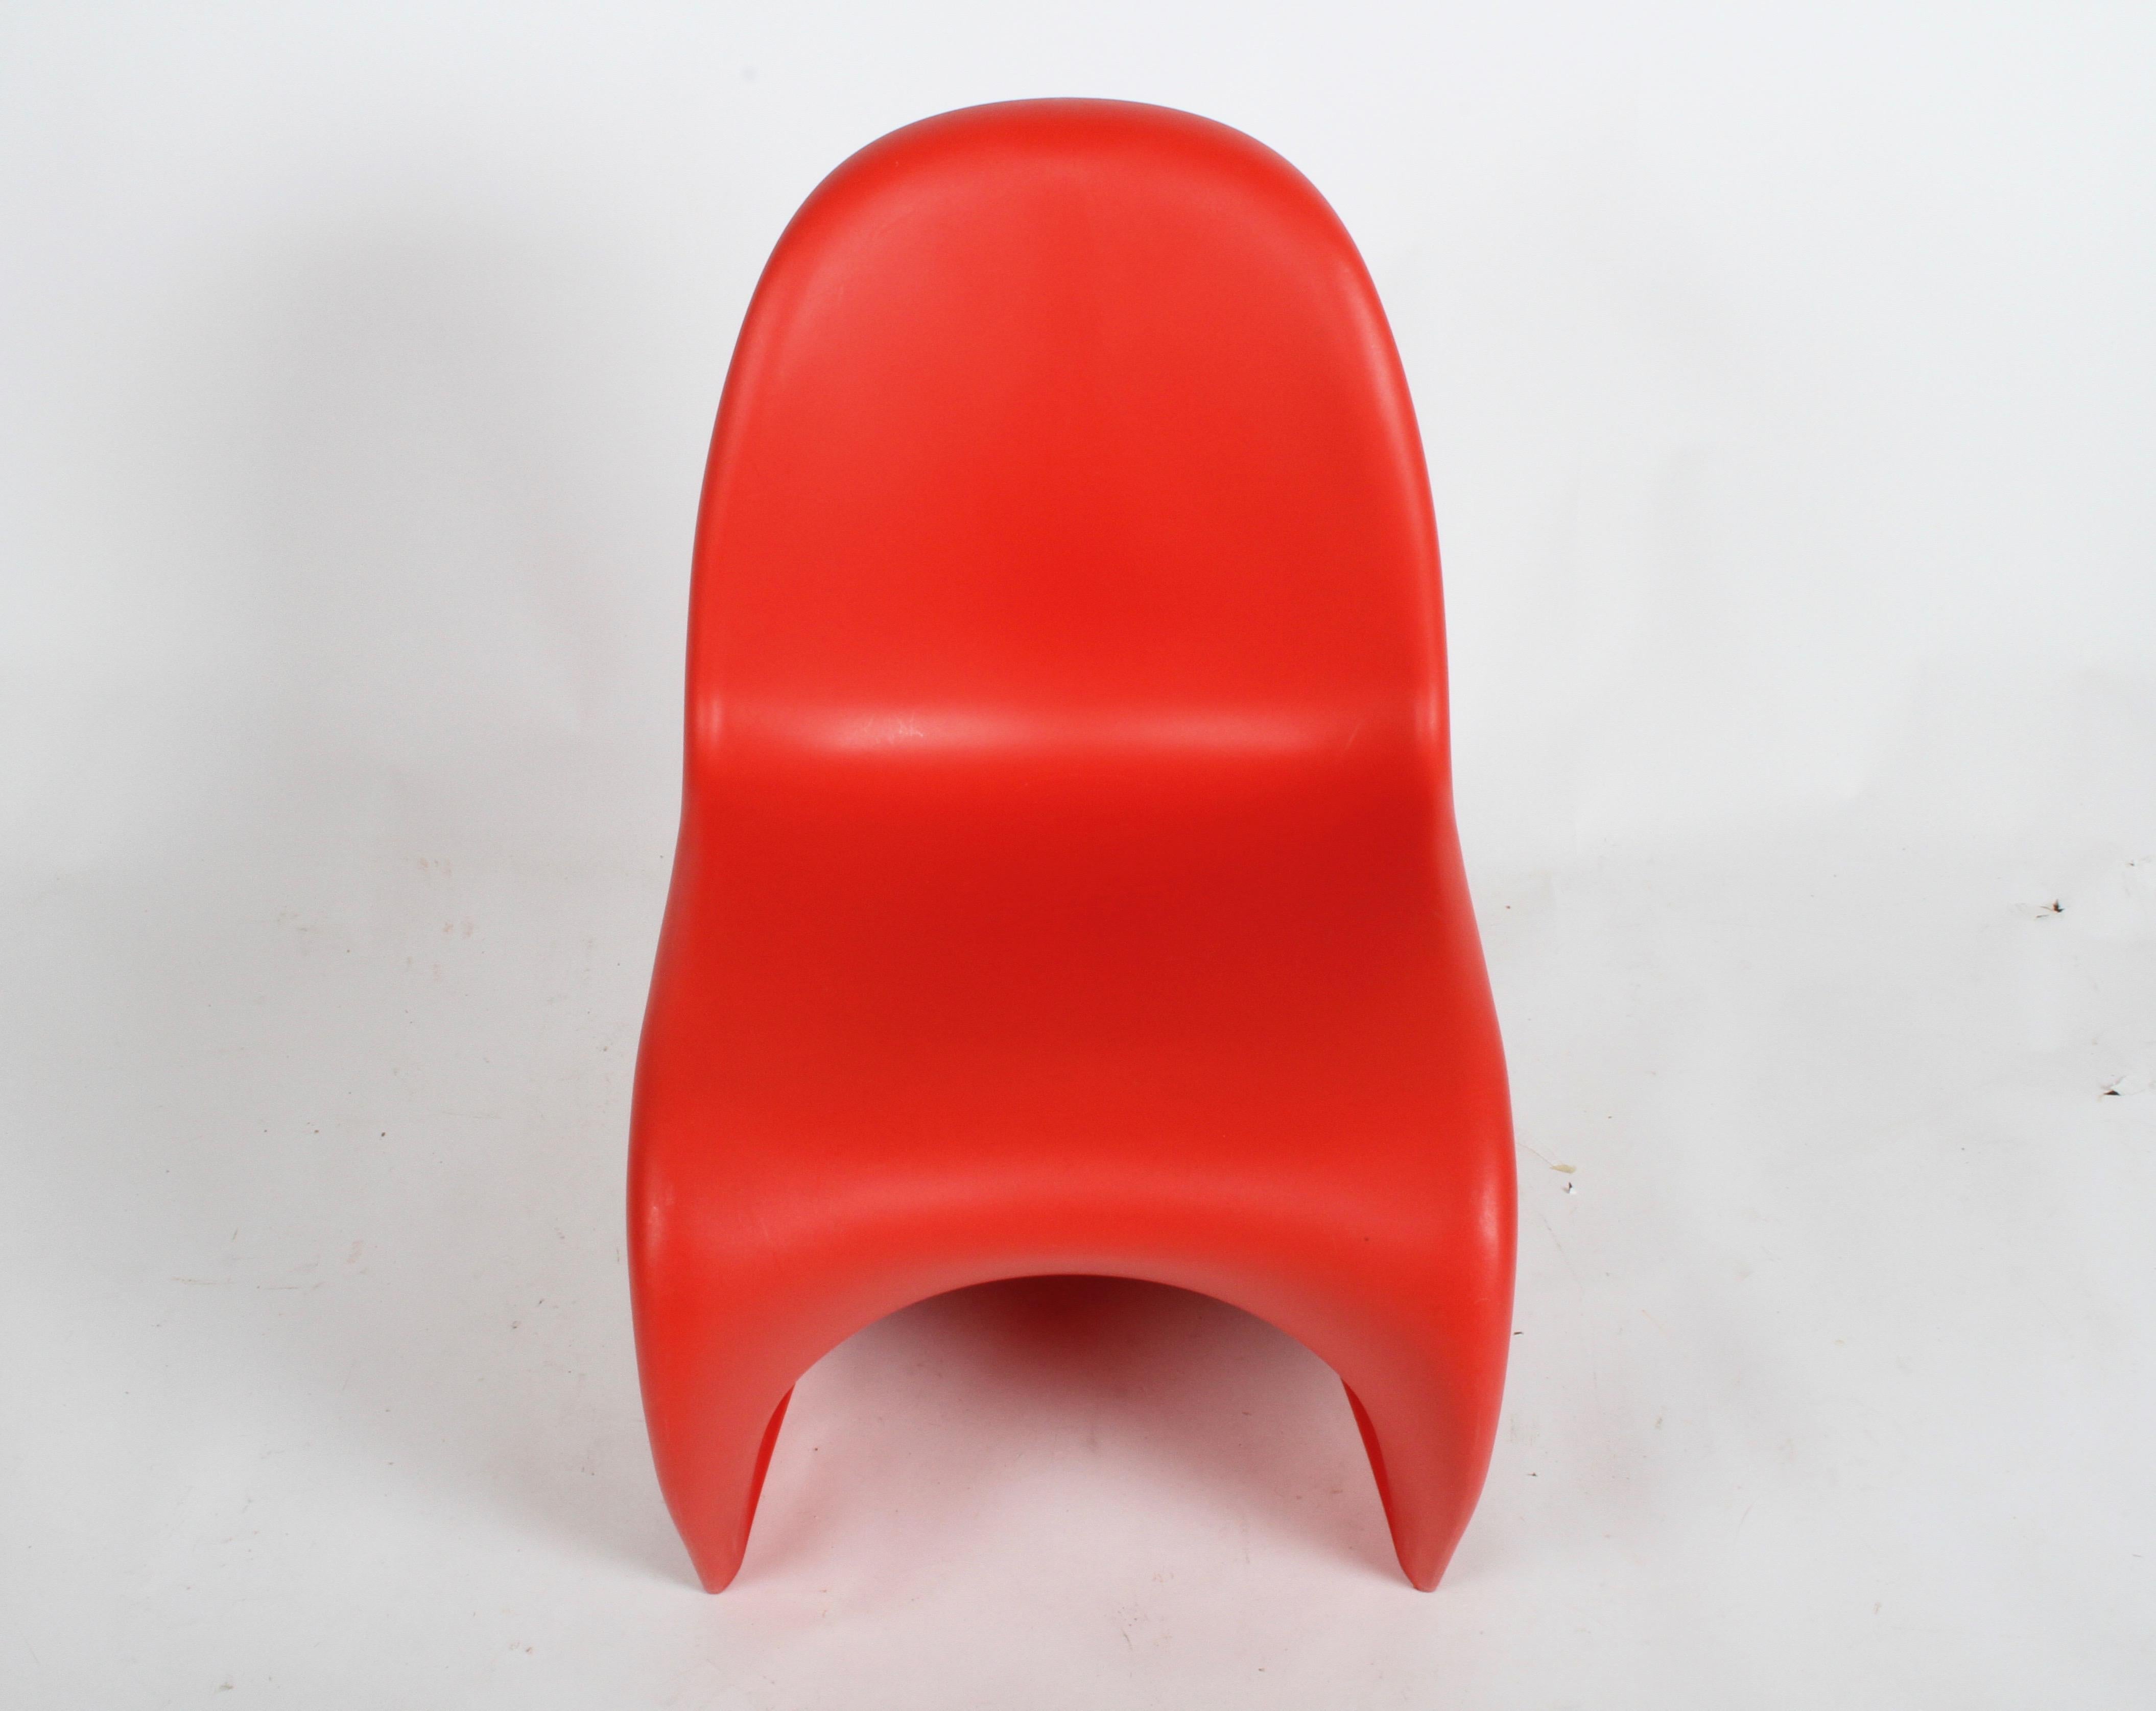 Classic Mid-Century Modern Verner Panton Chair in Red, Vitra Production 4